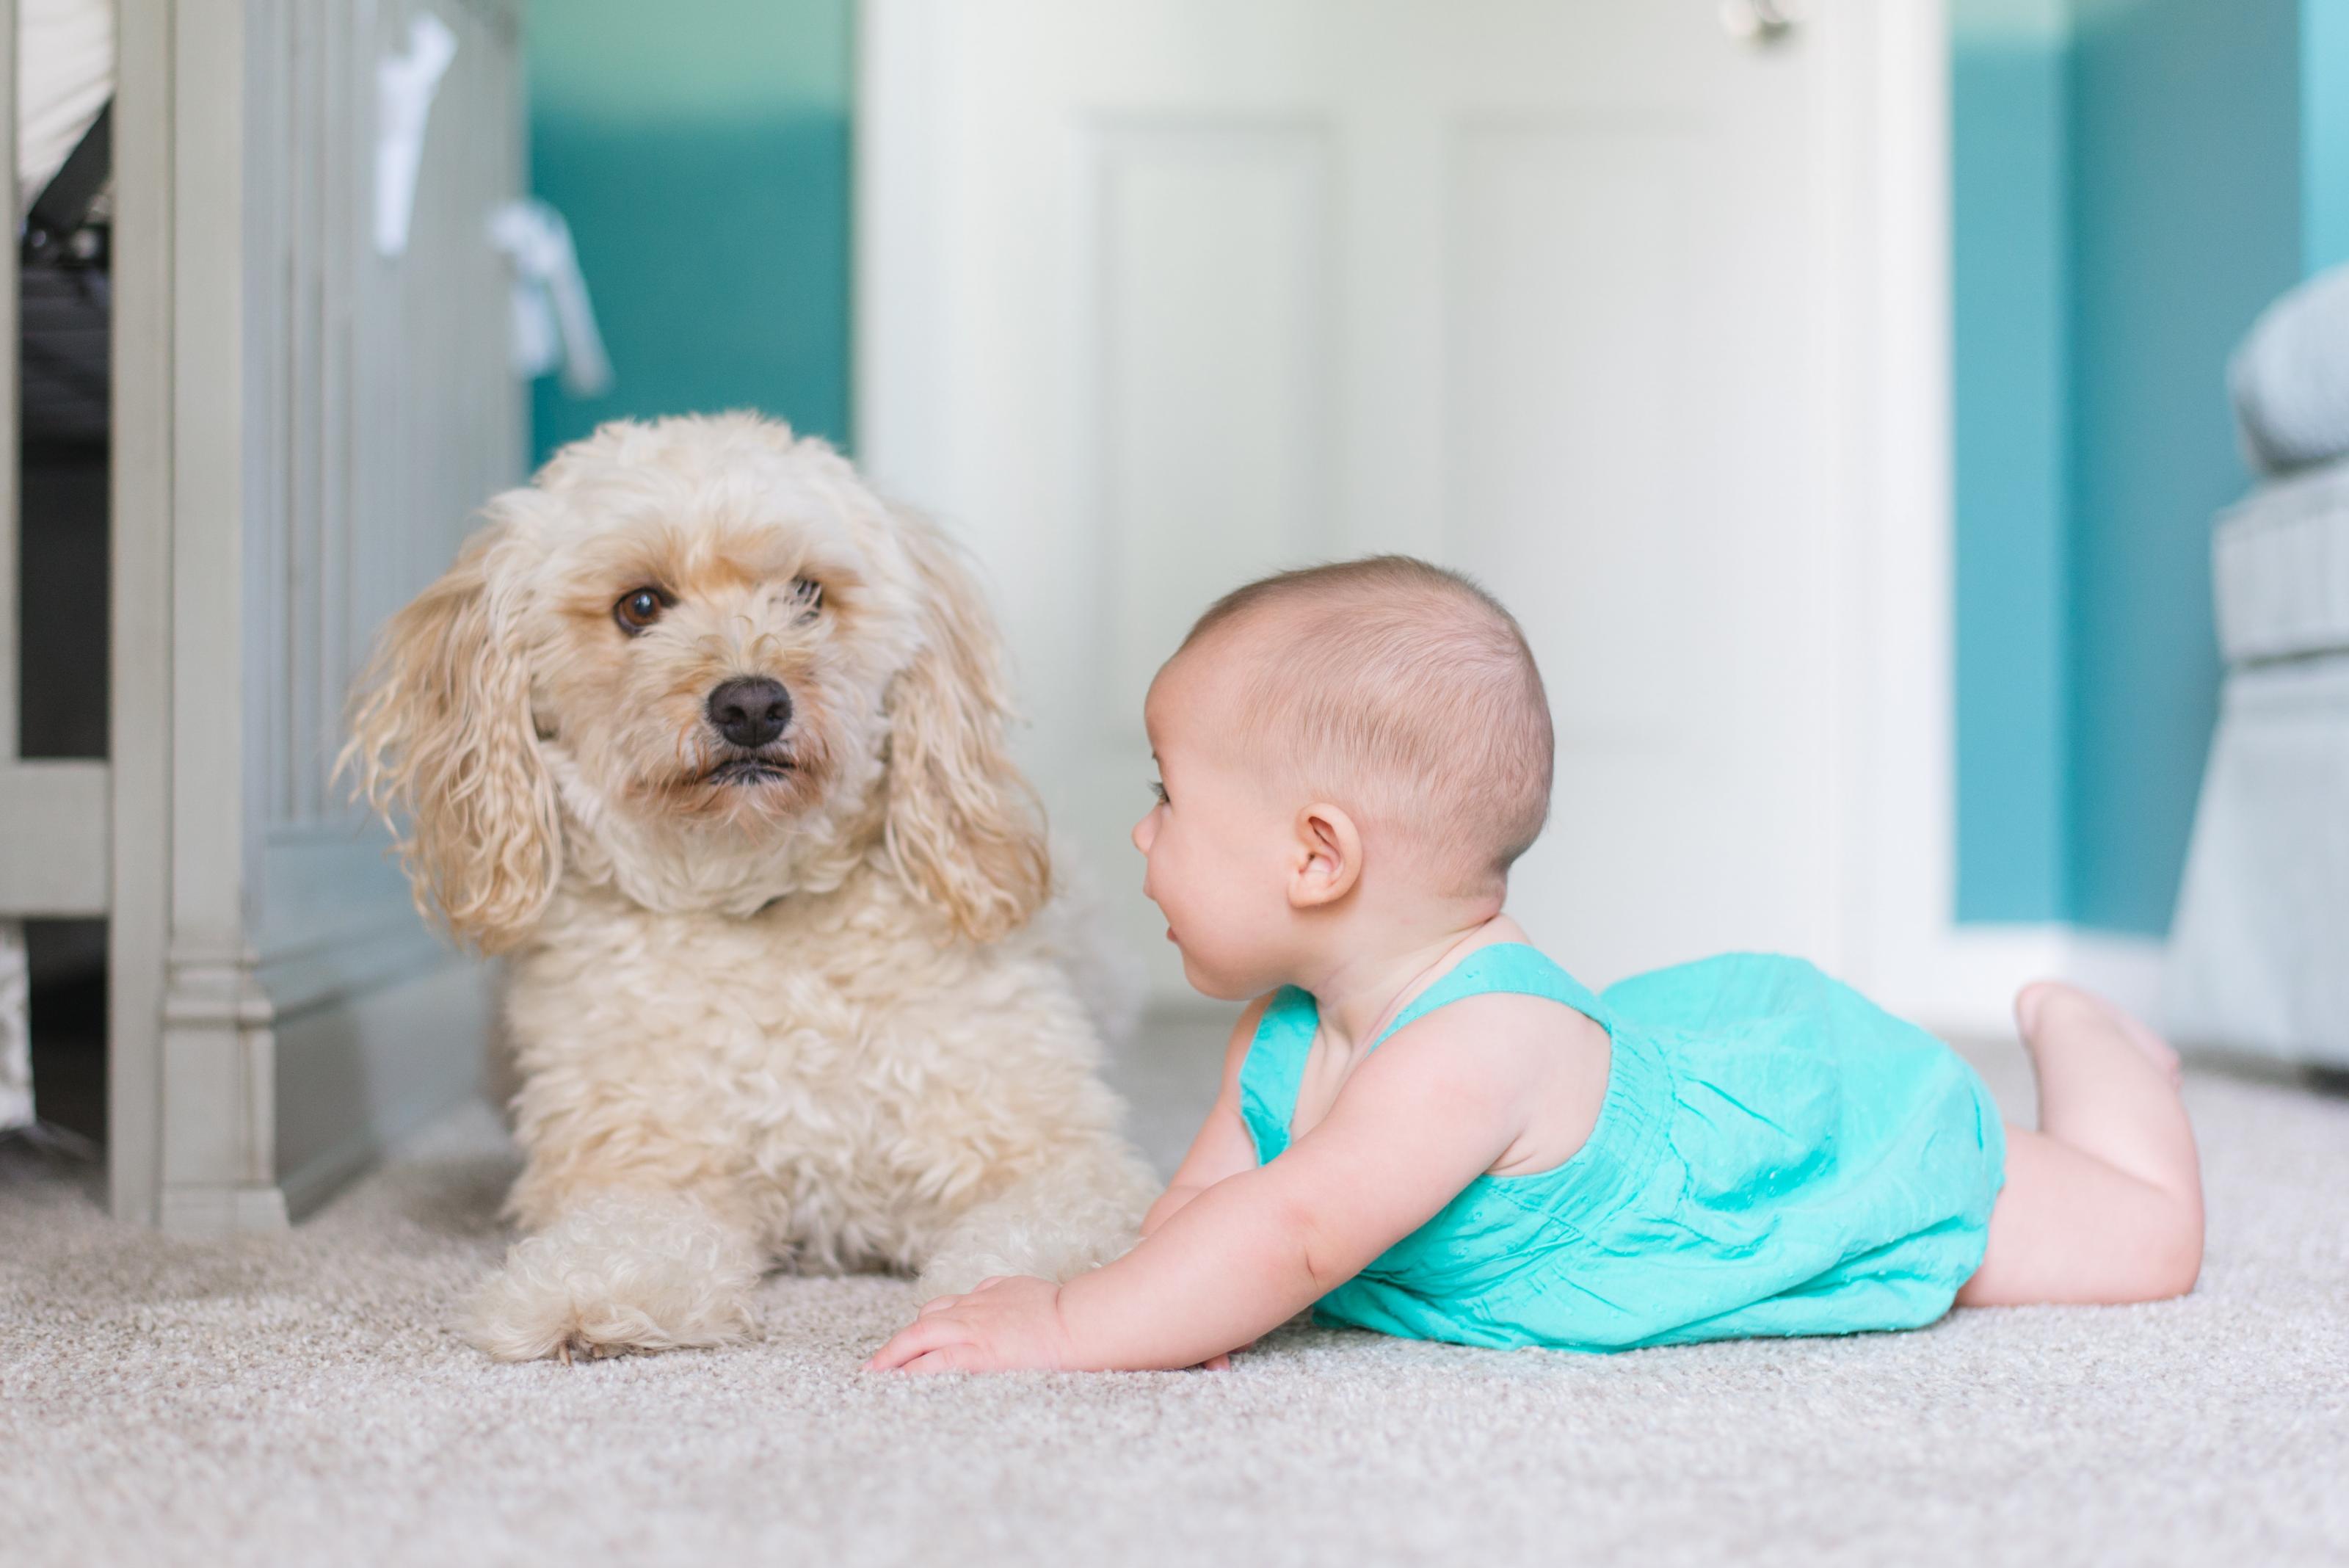 Blackwood Carpet Cleaner. How To Remove Pet Urine From Carpet